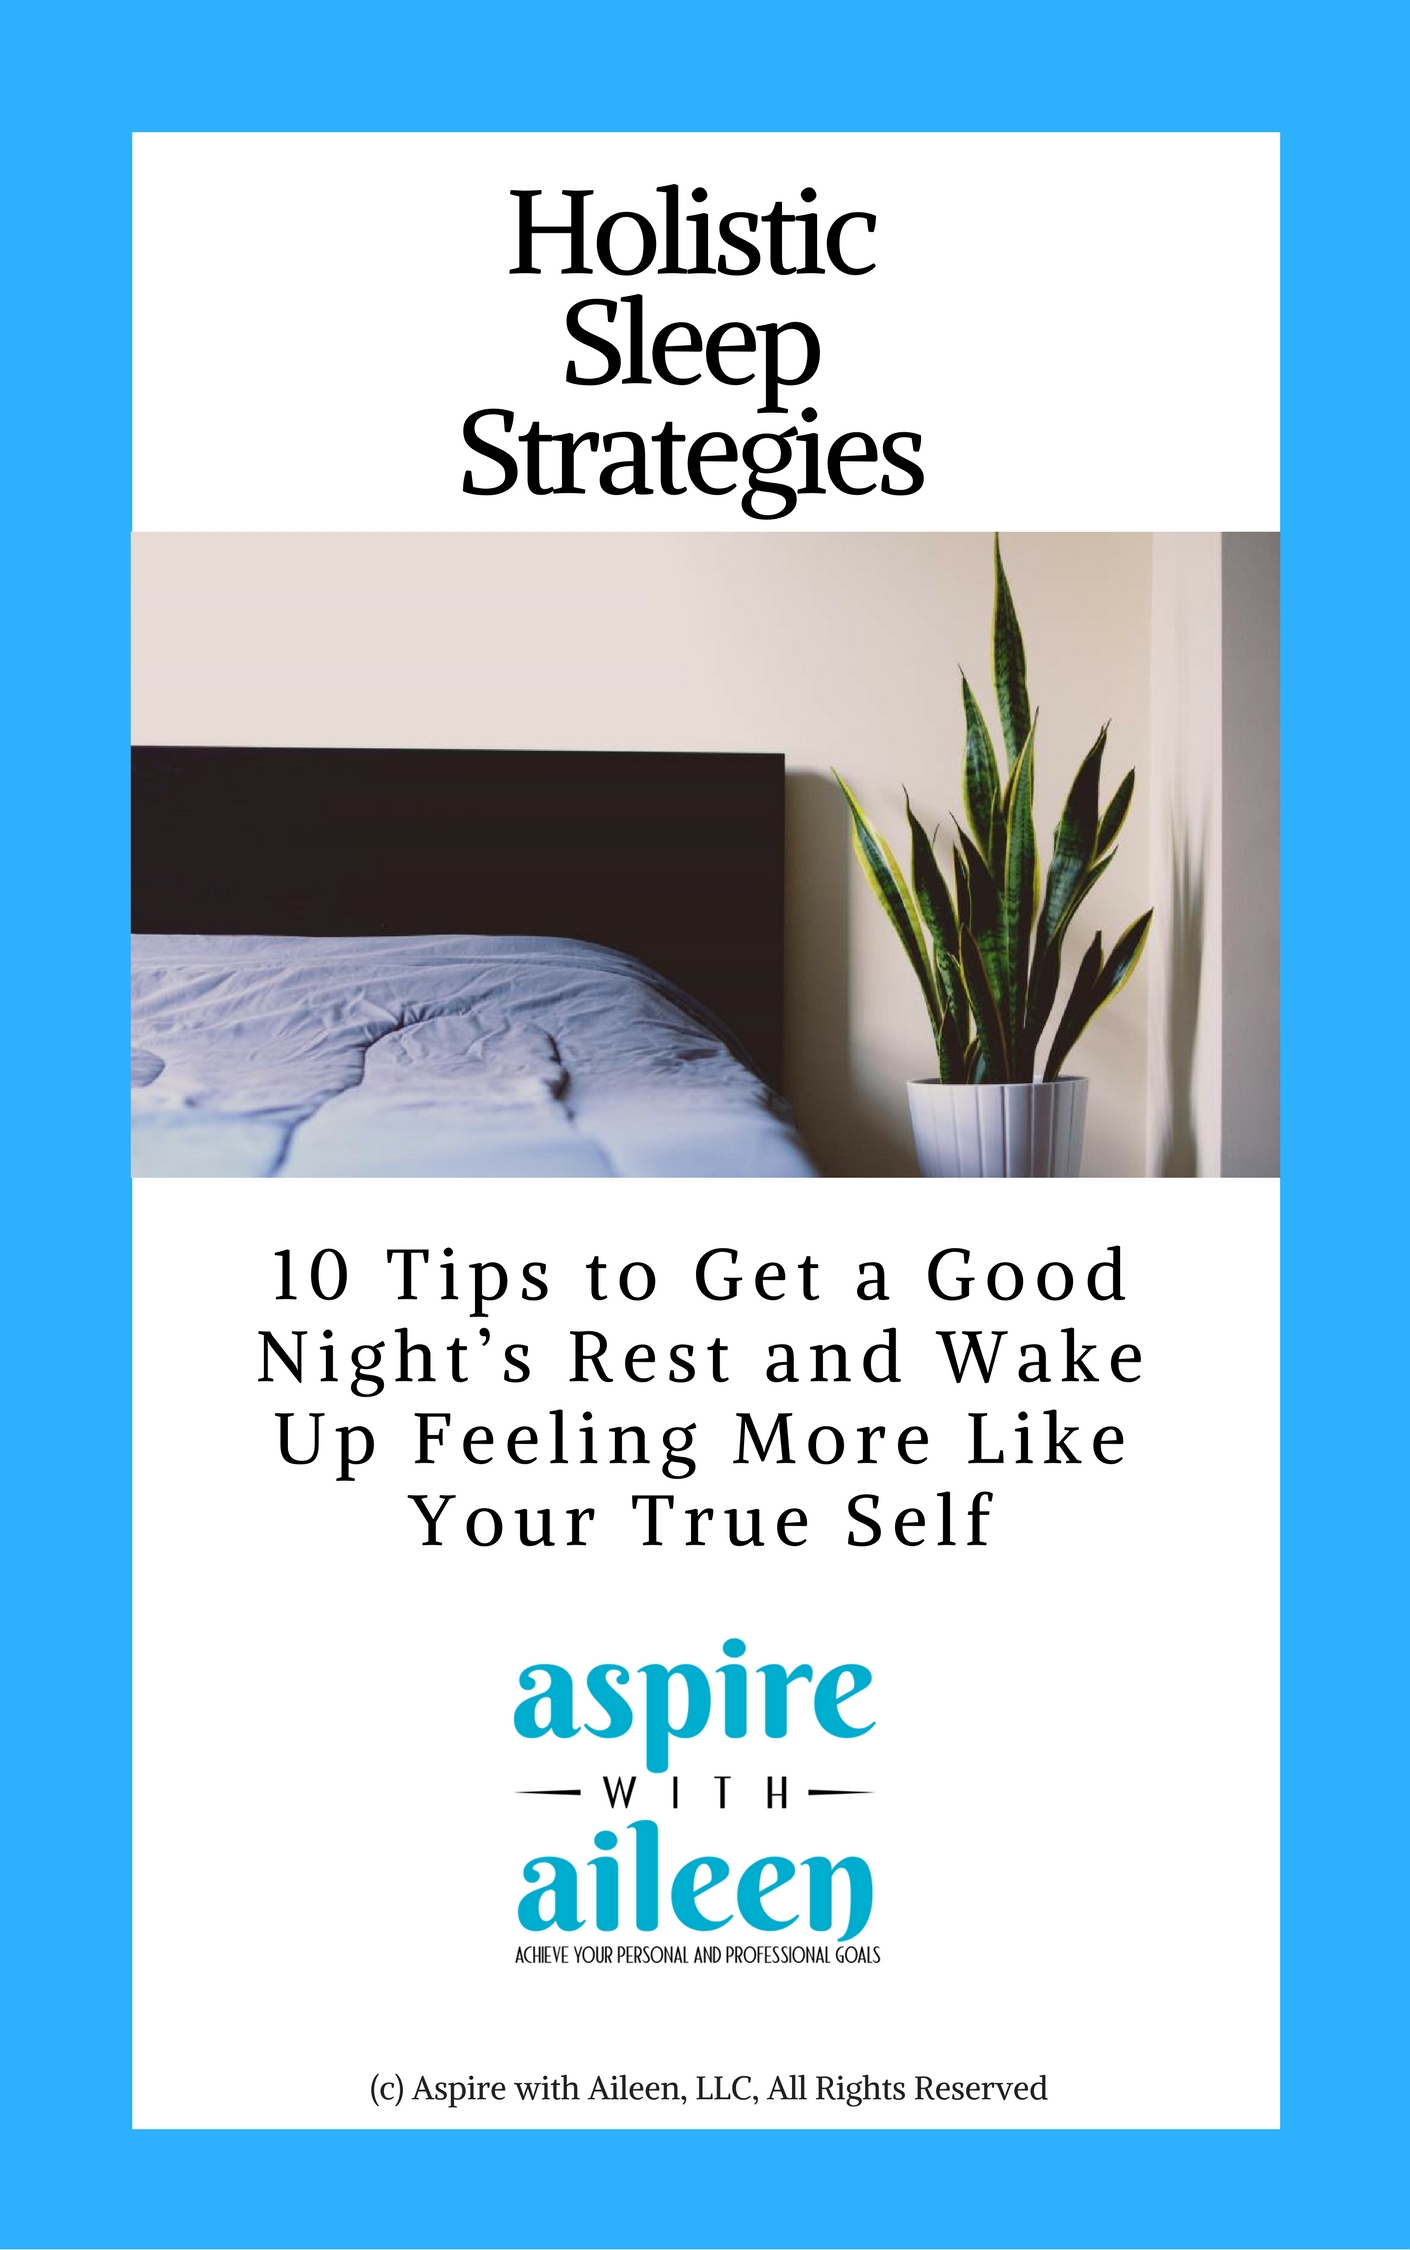 5 Tips on Relaxation - Aspire Training Team